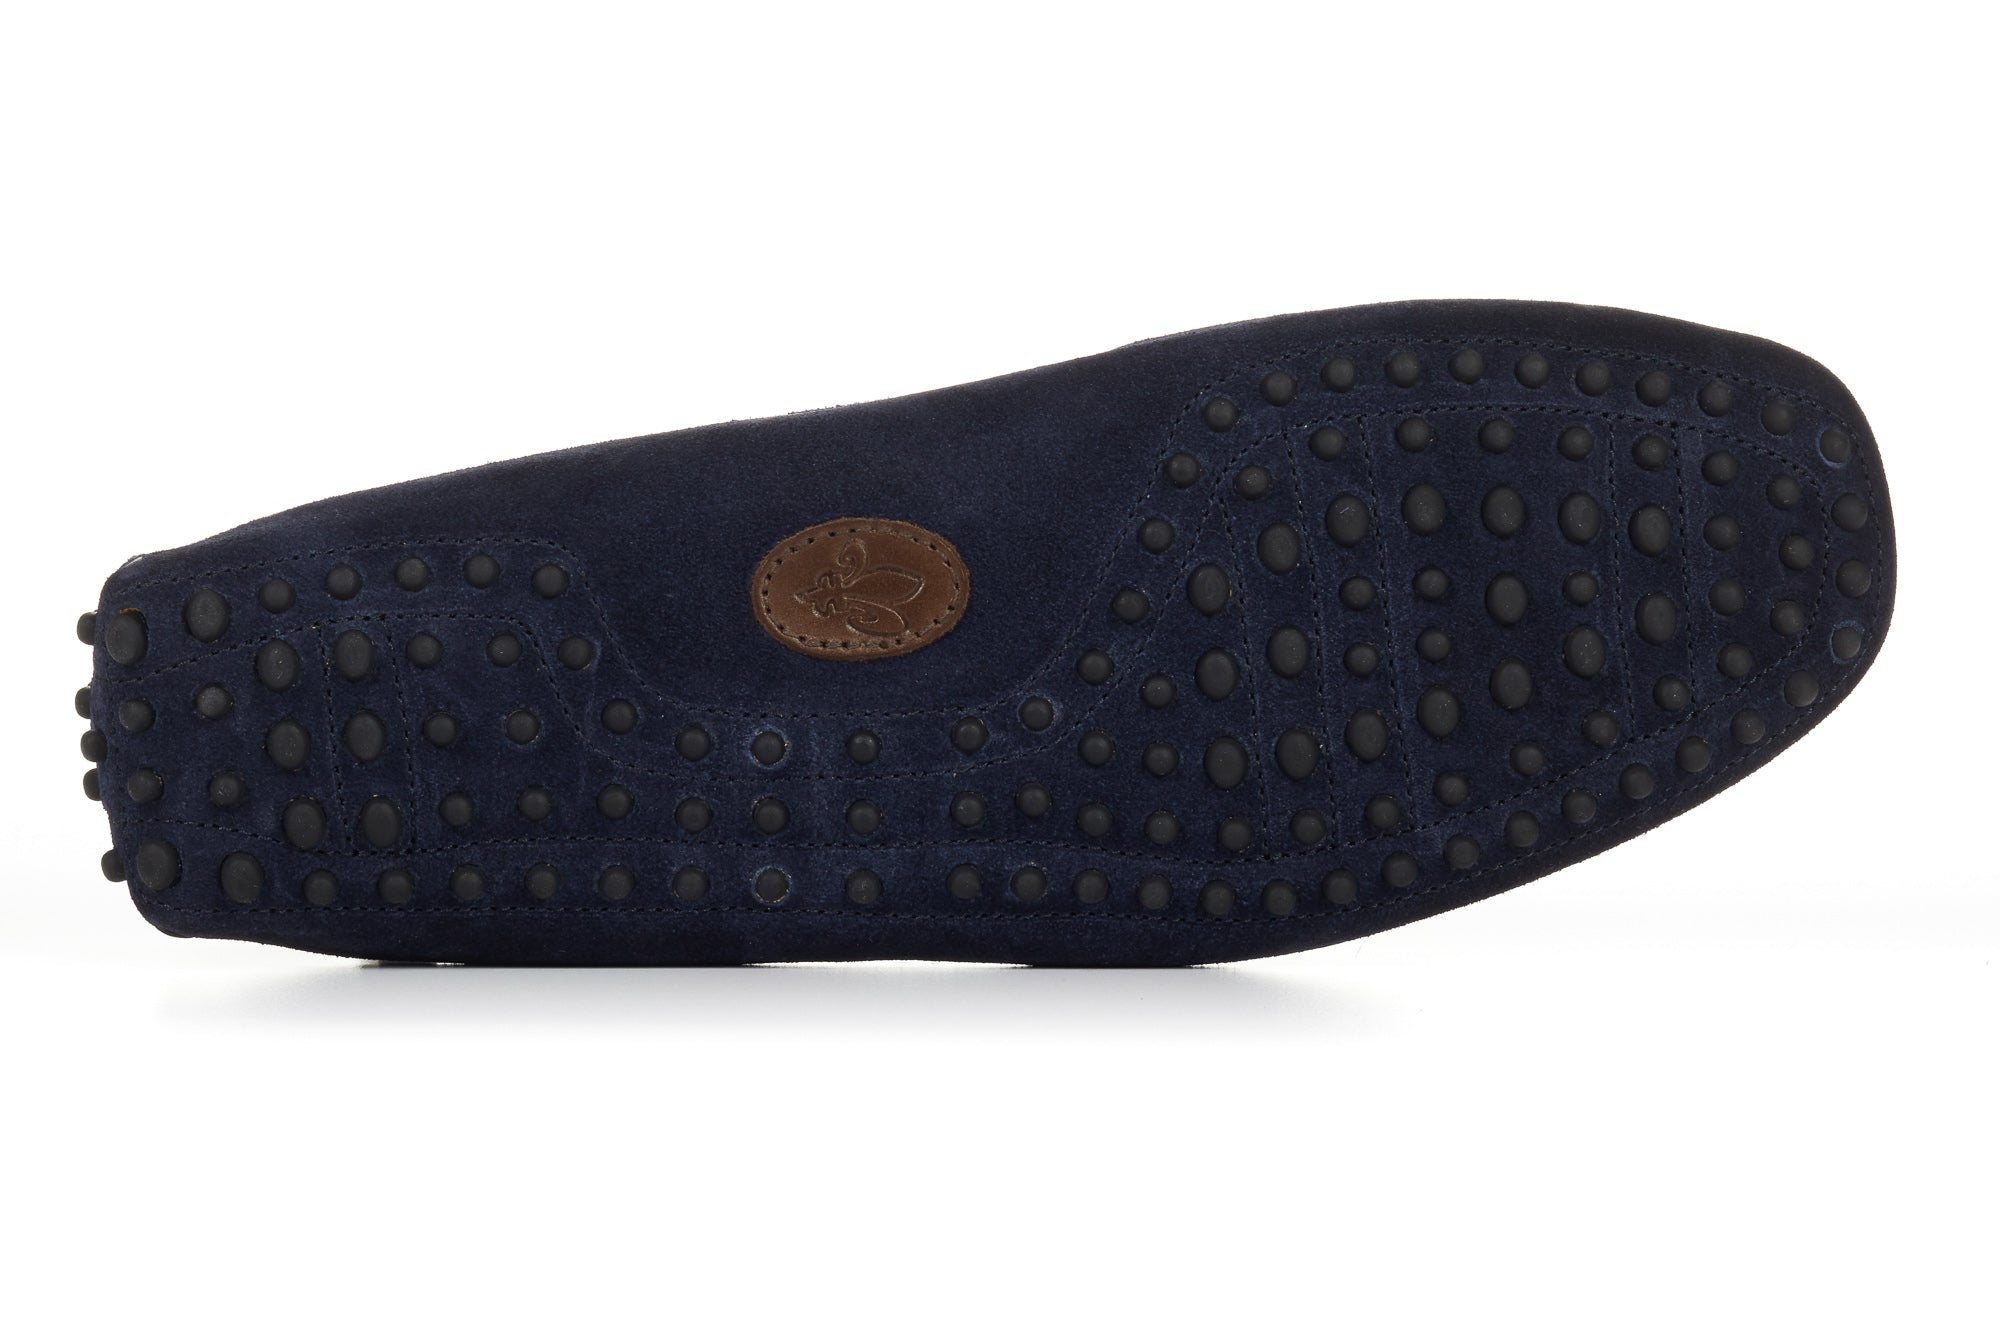 The McQueen Driving Loafer - Midnight Blue Suede